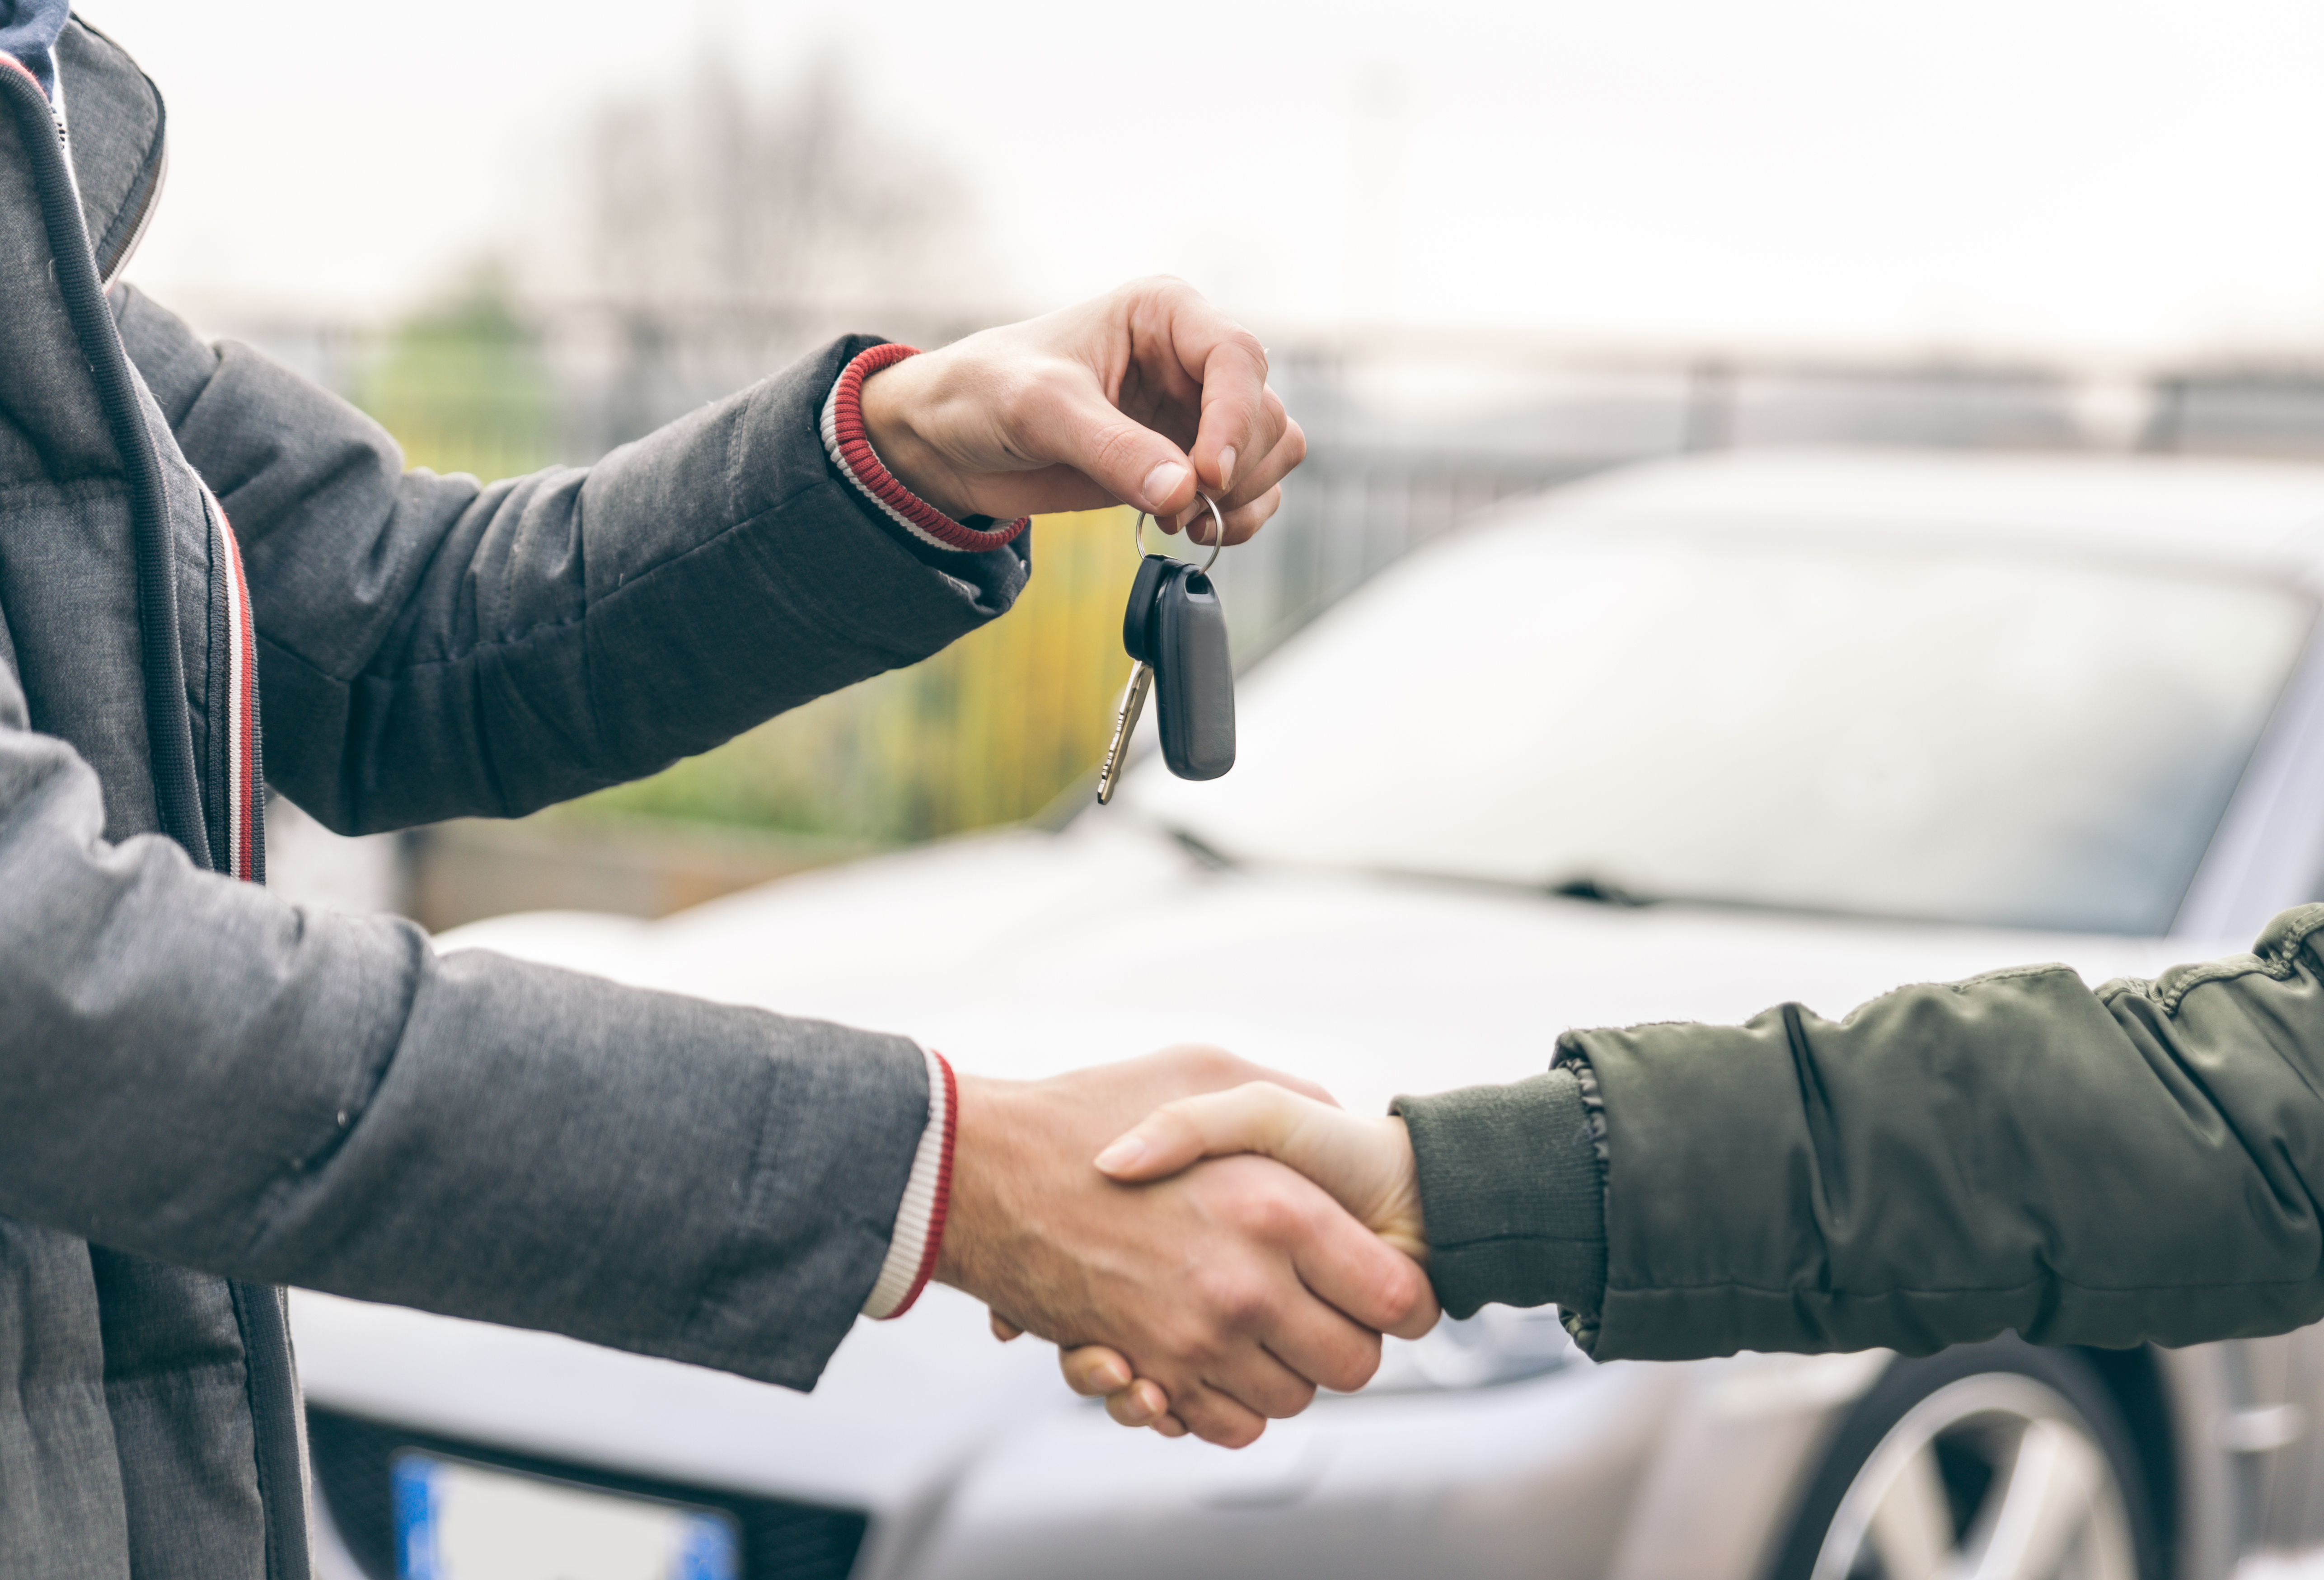 Dealers may be more inclined to offer incentives when you're near to closing the deal